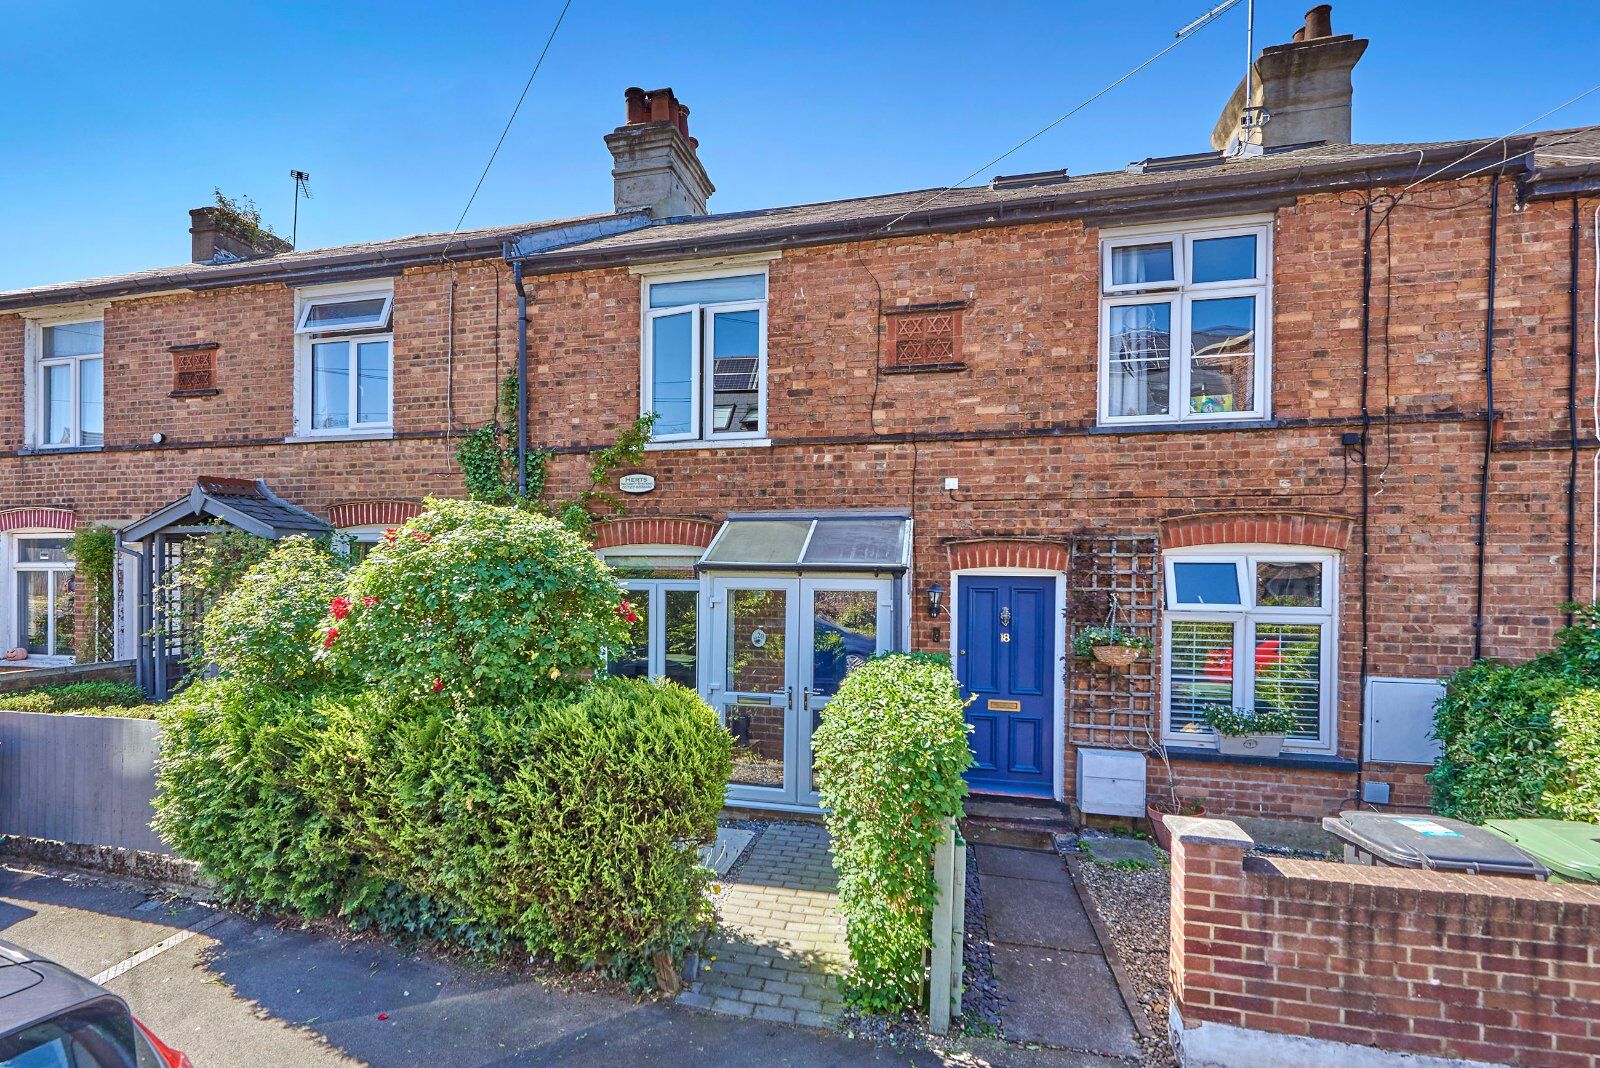 2 bedroom mid terraced house for sale Hedley Road, St. Albans, AL1, main image